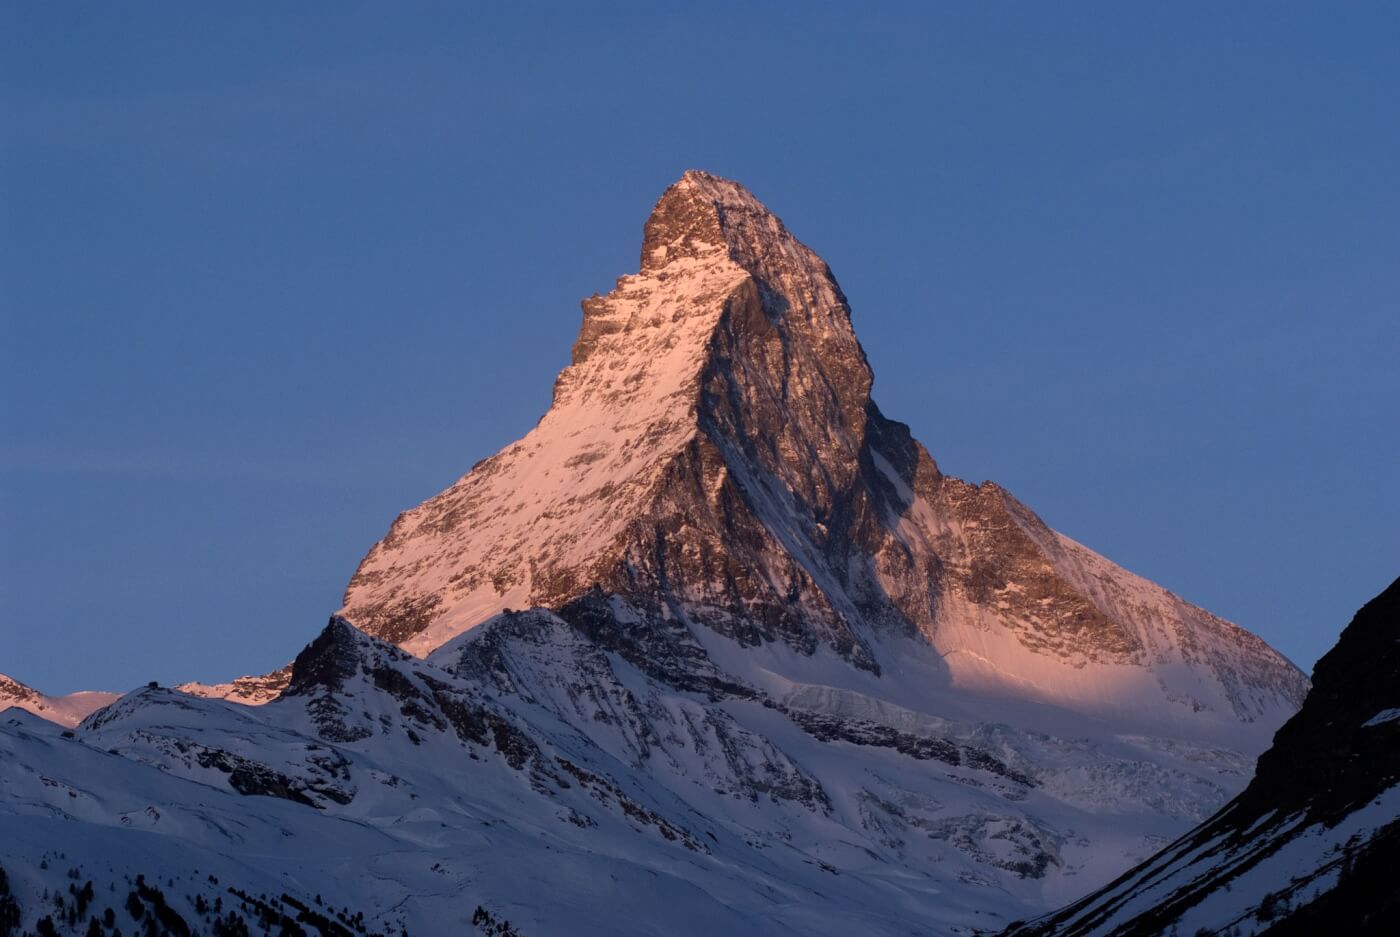 View of the Matterhorn, the perfect place for a selfie.